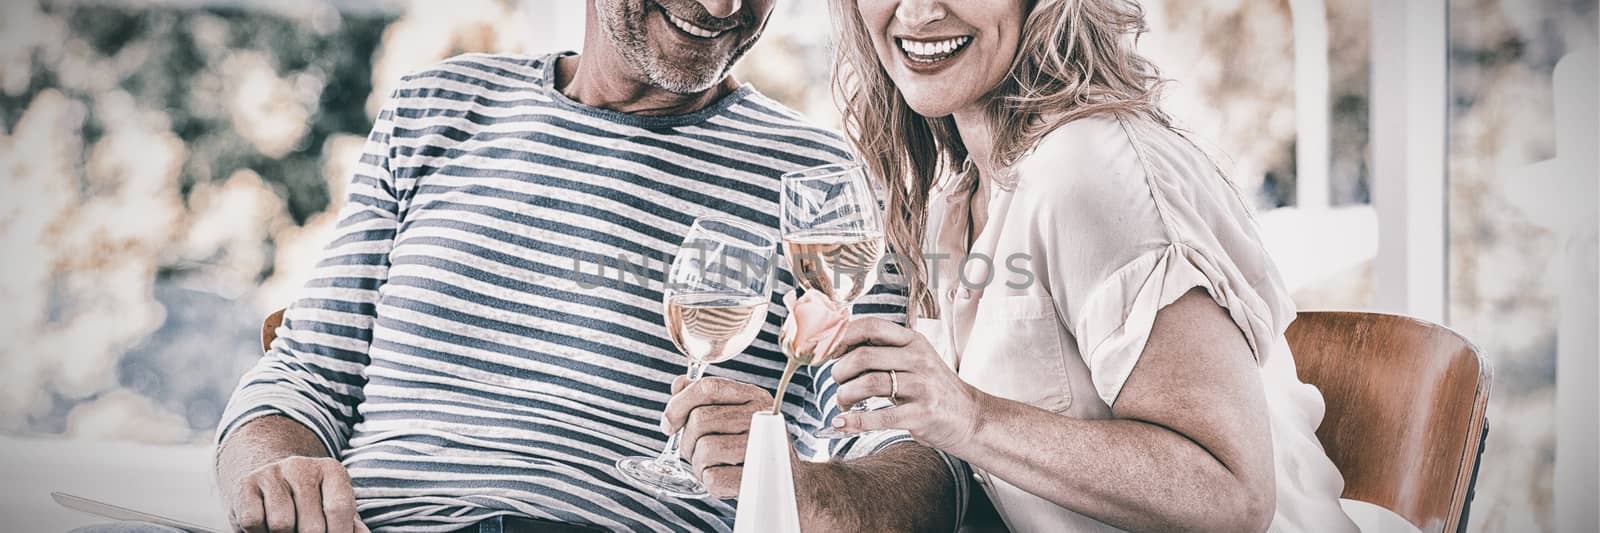 Portrait of smiling mature couple holding wine glasses by Wavebreakmedia